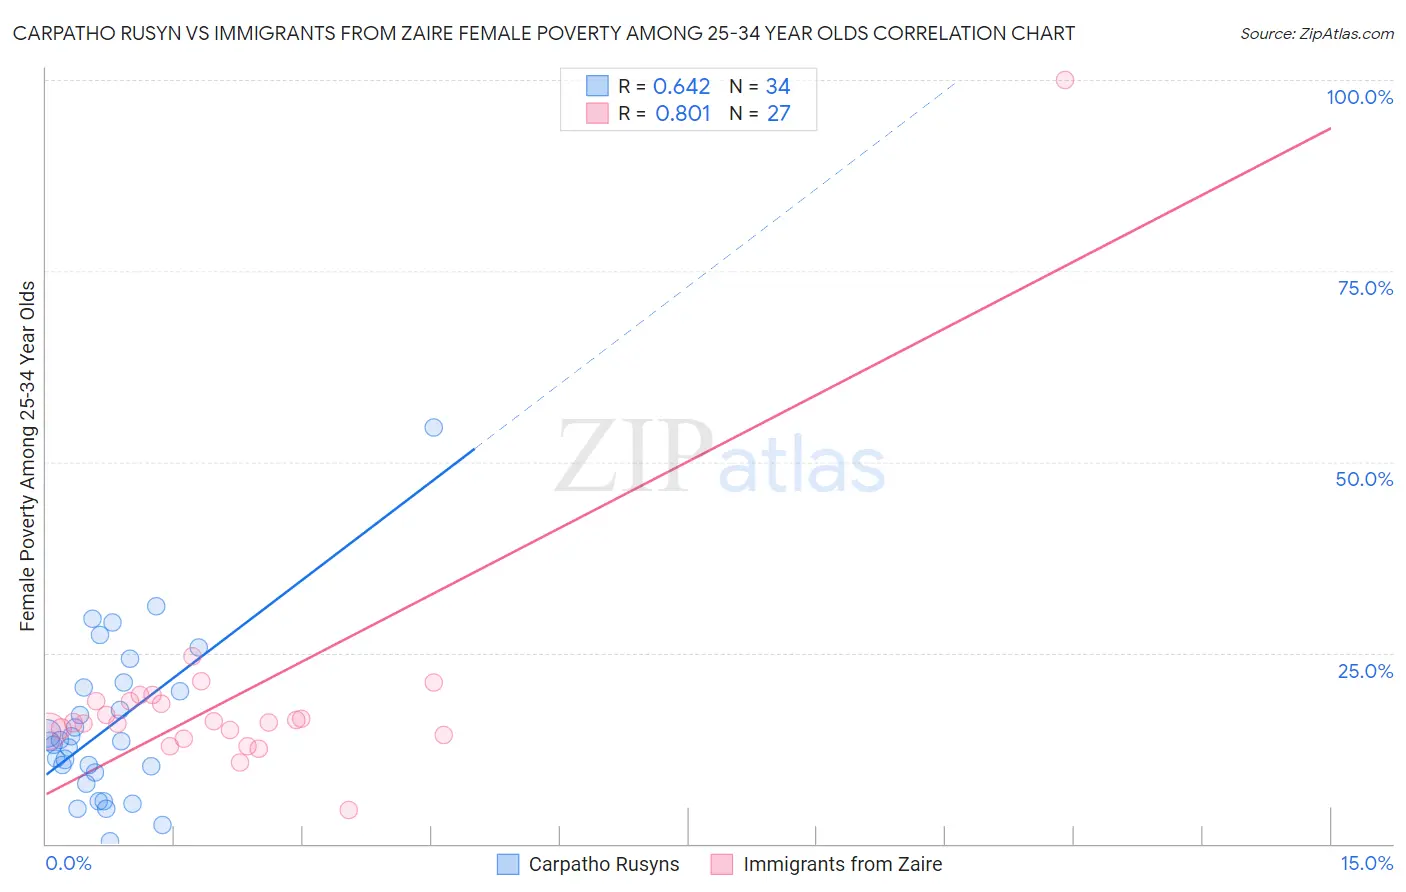 Carpatho Rusyn vs Immigrants from Zaire Female Poverty Among 25-34 Year Olds